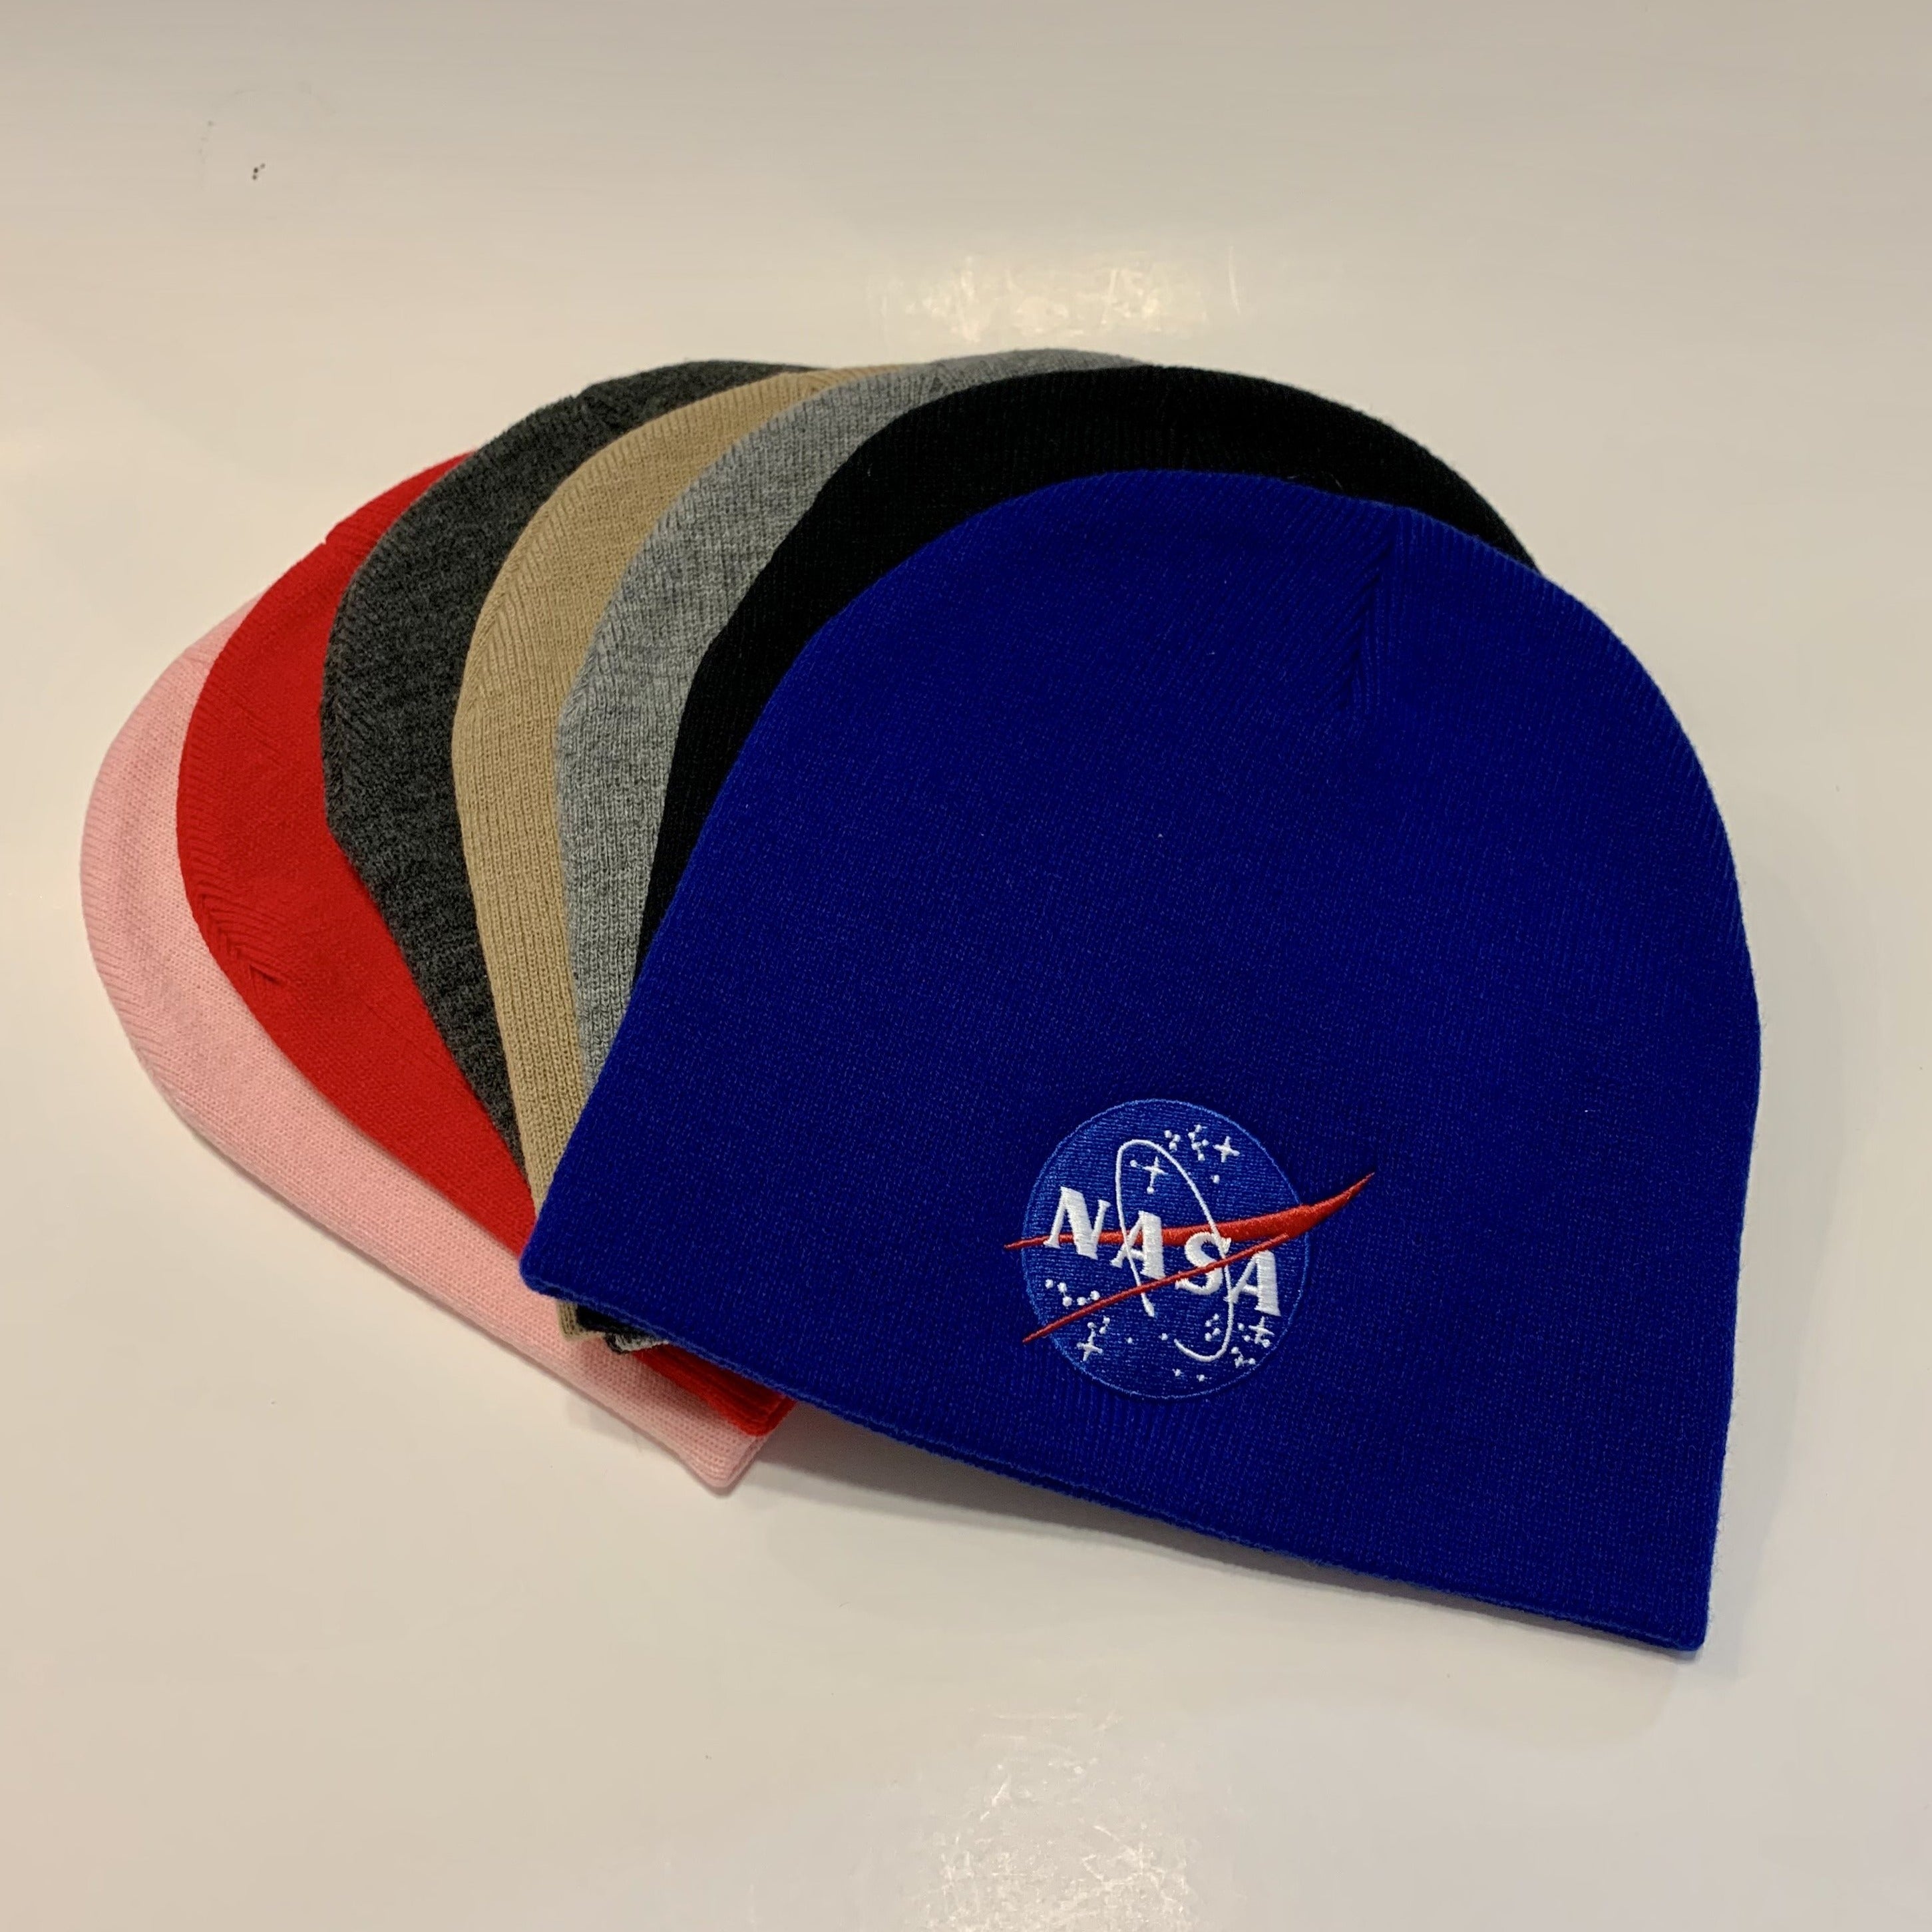 NASA Beanie with Embroidered NASA Logo - Assorted Colors